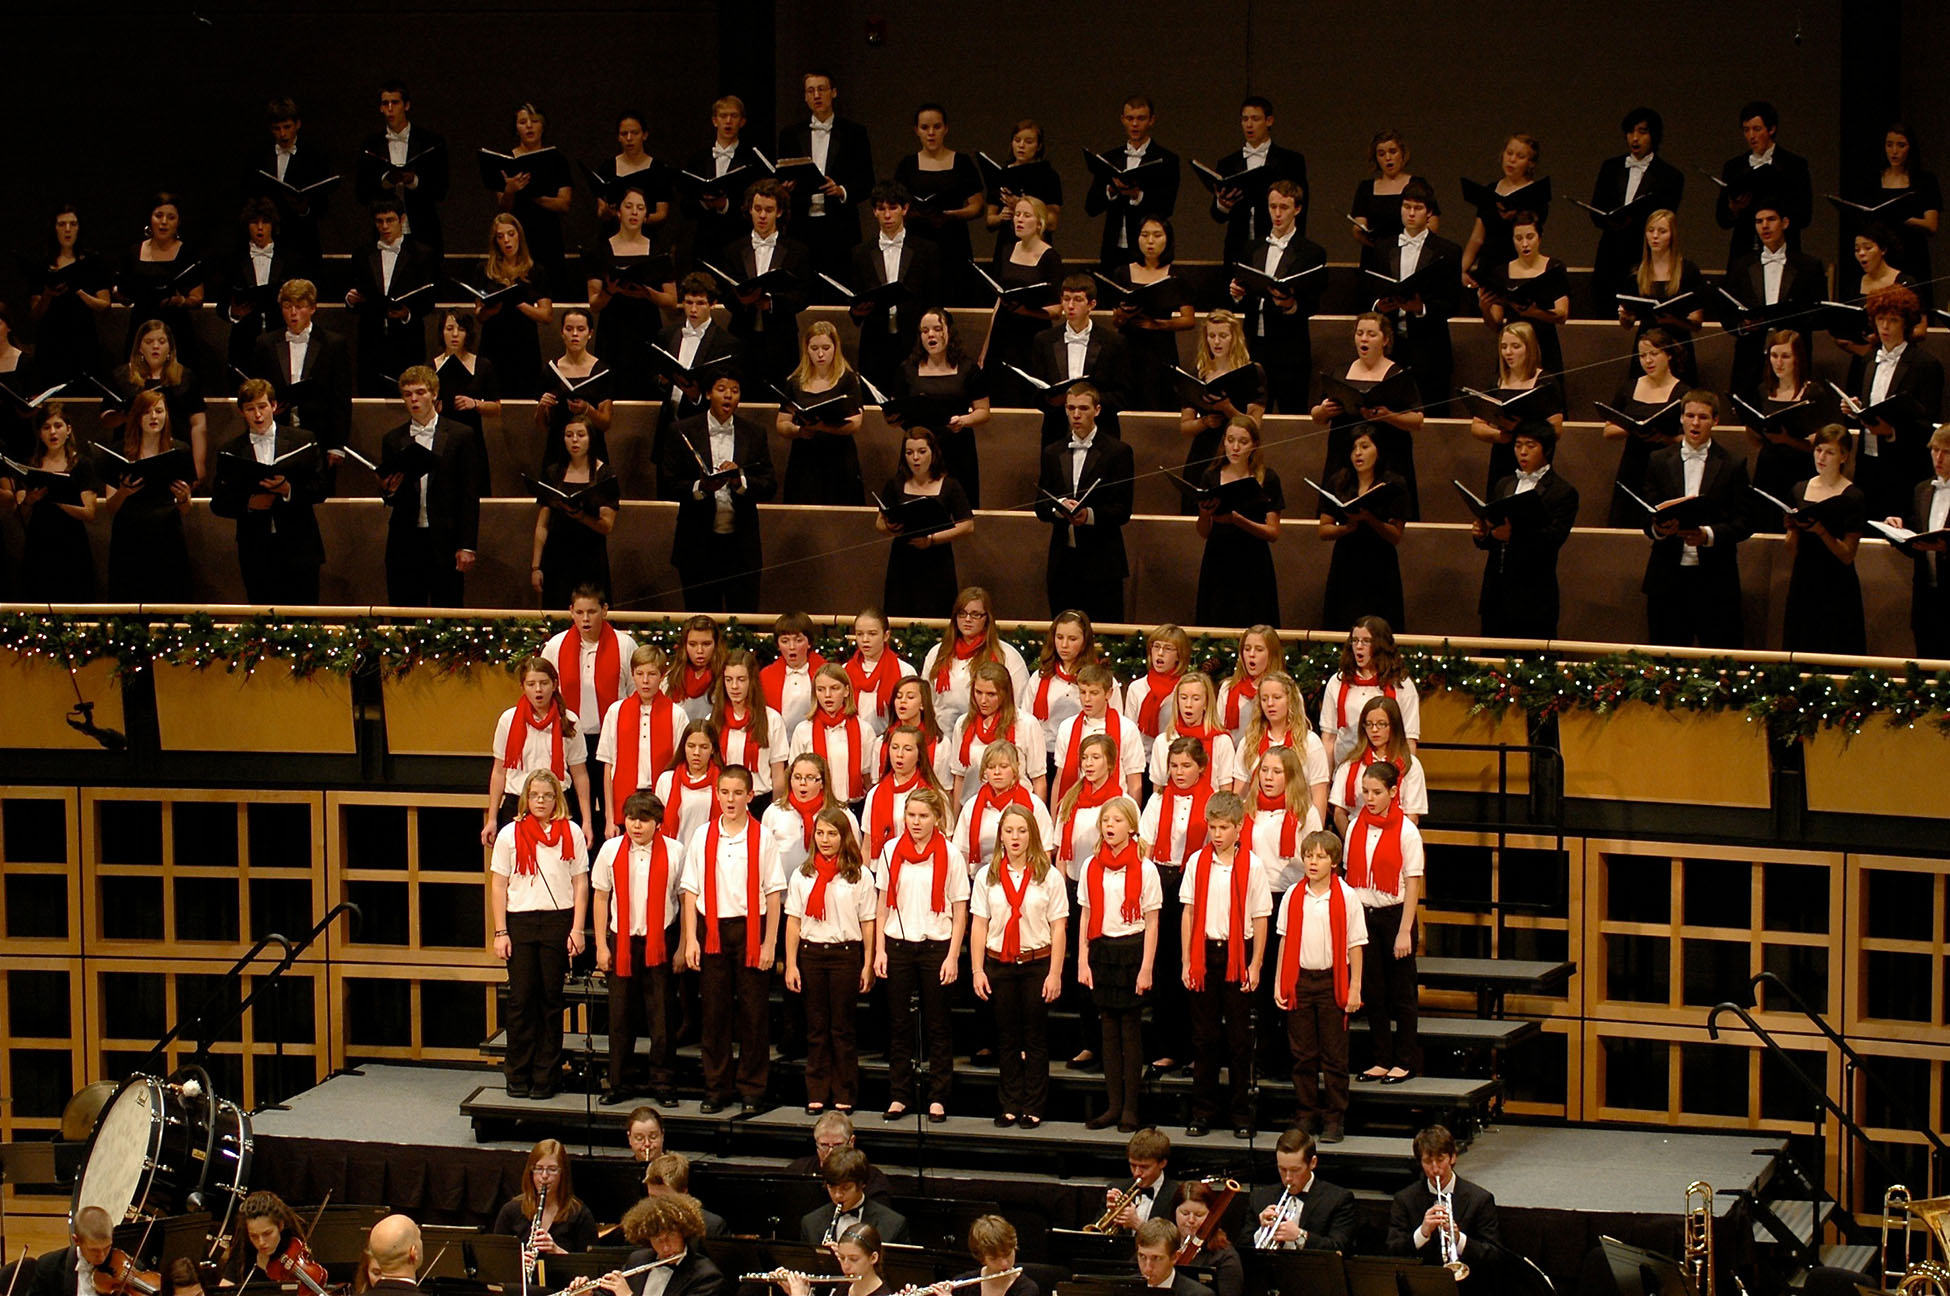 The Shout for Joy children's choir and the Goshen College choirs perform in Sauder Concert Hall for Festival of Carols